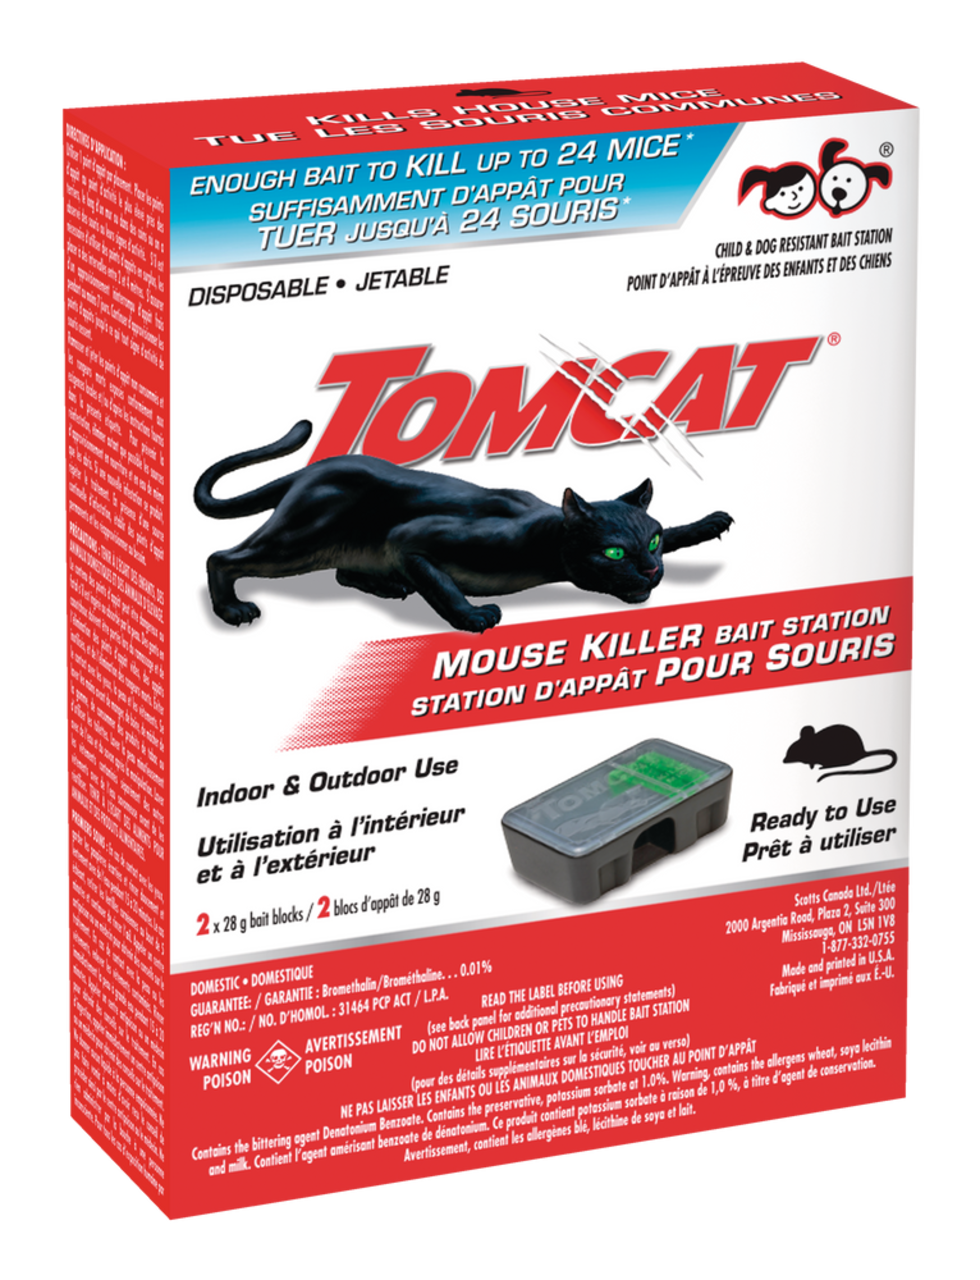 https://media-www.canadiantire.ca/product/seasonal-gardening/gardening/weed-insect-rodent-control/0591678/tomcat-mouse-killer-disposable-bait-station-2-pack-eba06b18-3111-44af-b00c-3c722764ba3d.png?imdensity=1&imwidth=640&impolicy=mZoom